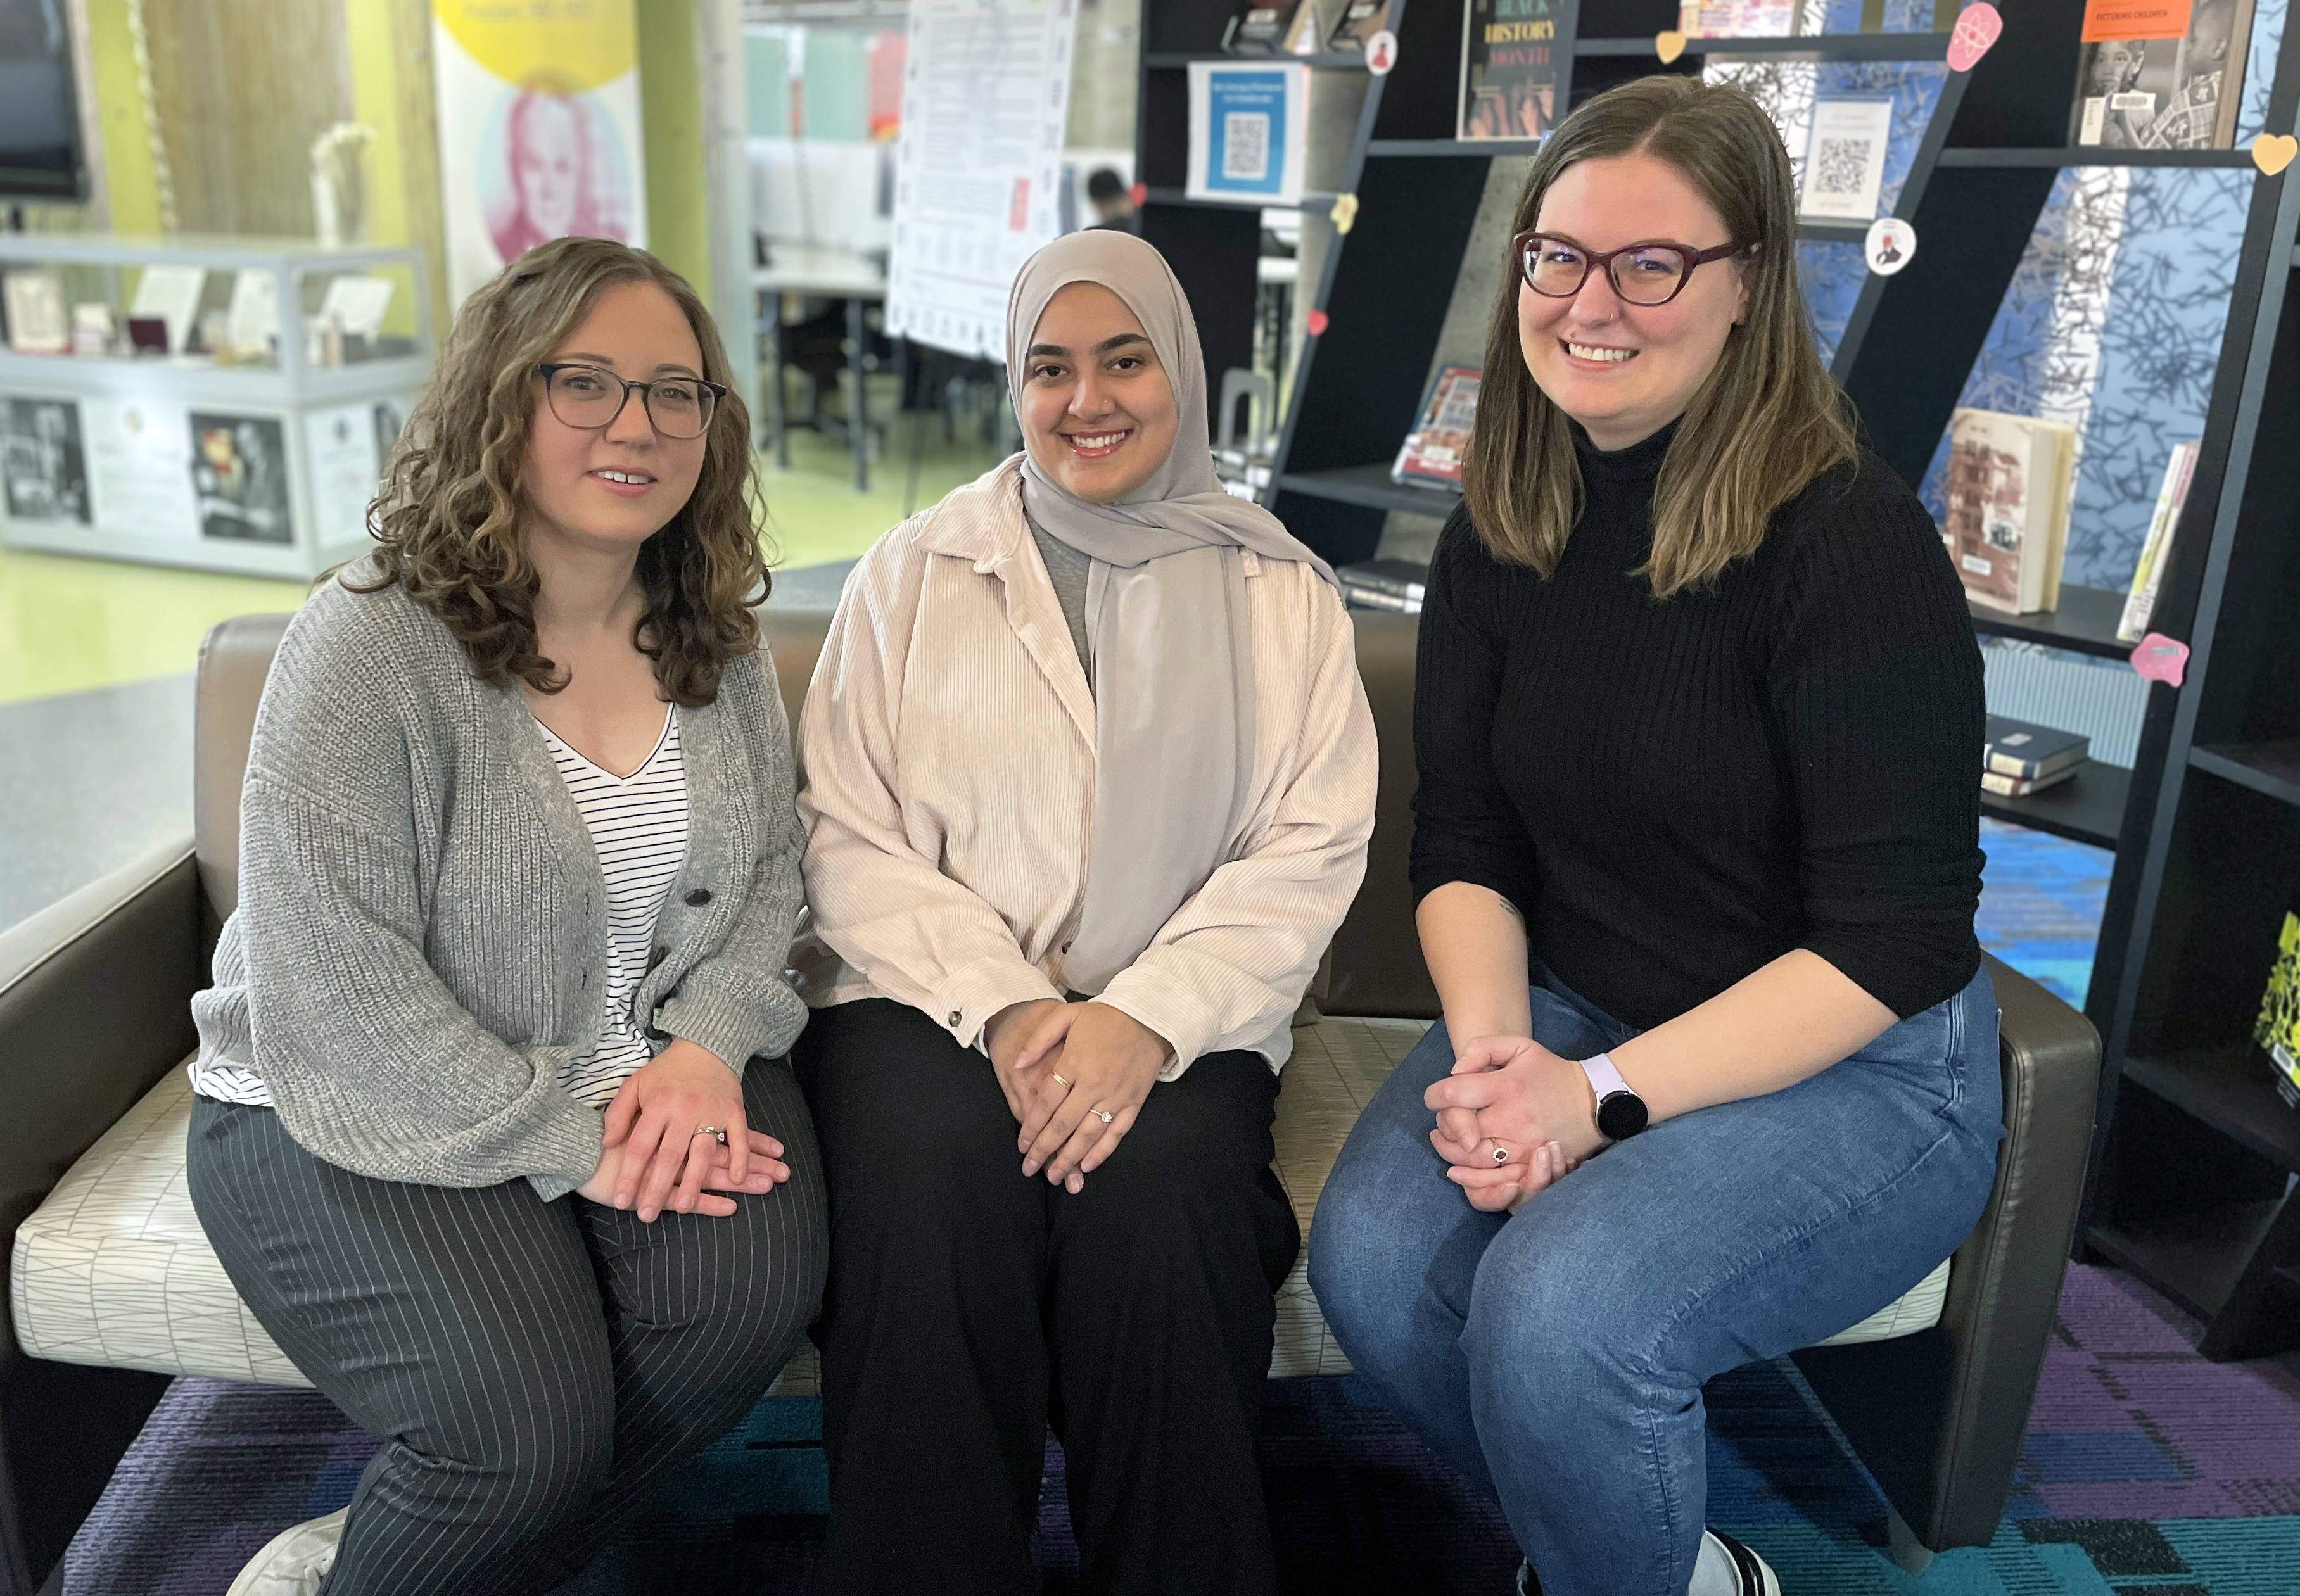 Three staff members from McMaster University Libraries’ Teaching and Learning Mini Conference planning committee sit on a couch indoors smiling near a book display. 